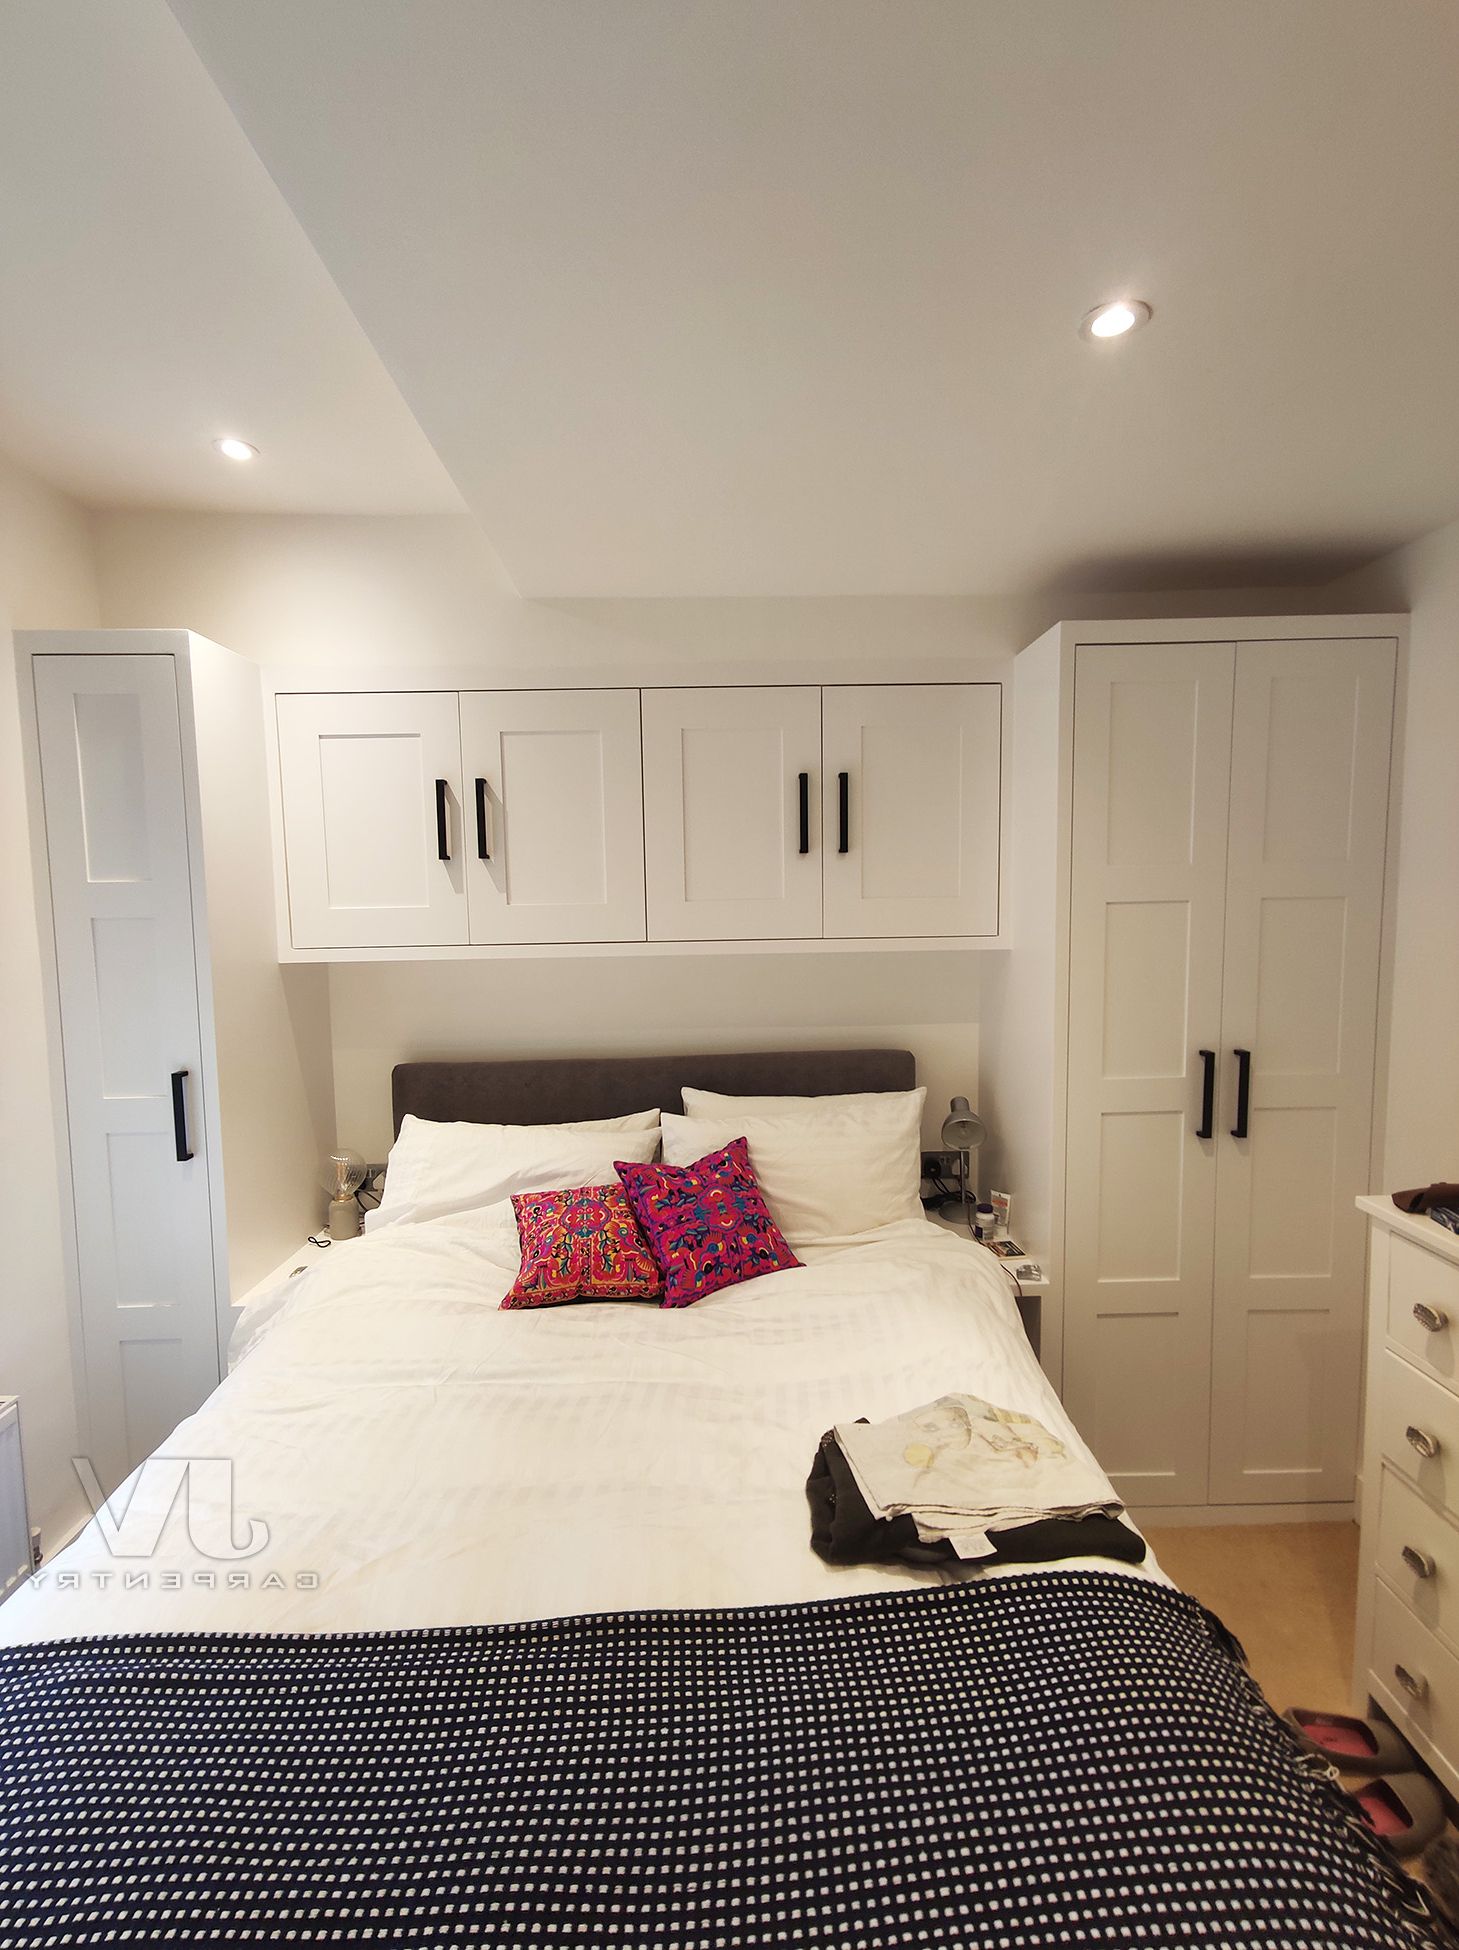 12 Fitted Wardrobes Over Bed Ideas For Your Bedroom | Jv Carpentry Pertaining To Wardrobes Beds (View 4 of 20)